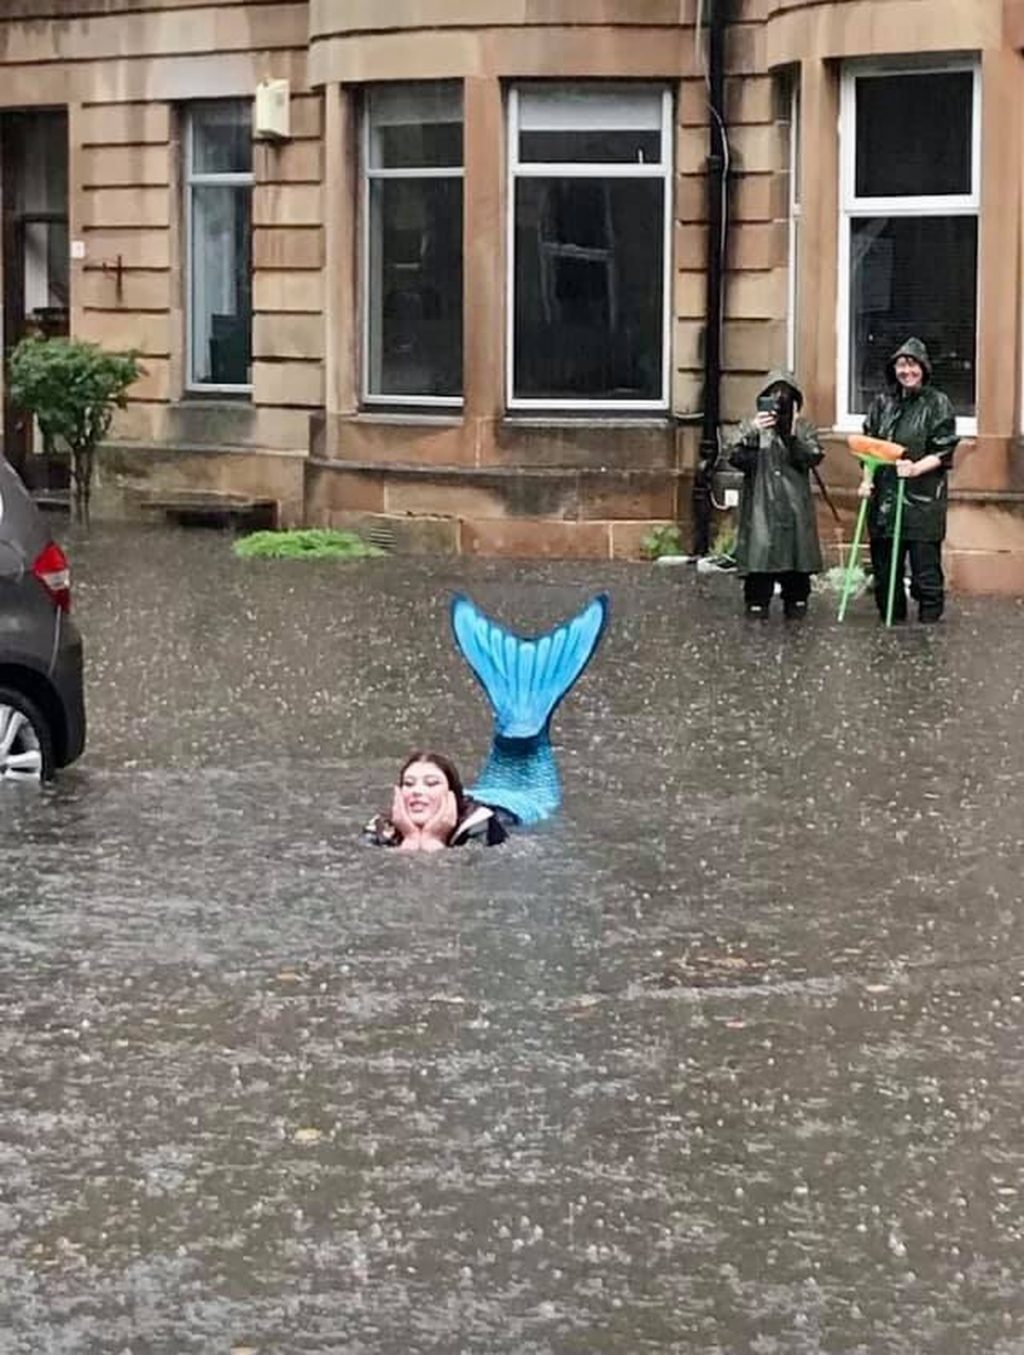 The woman dressed as an angel was photographed in the middle of the flood in Scotland World